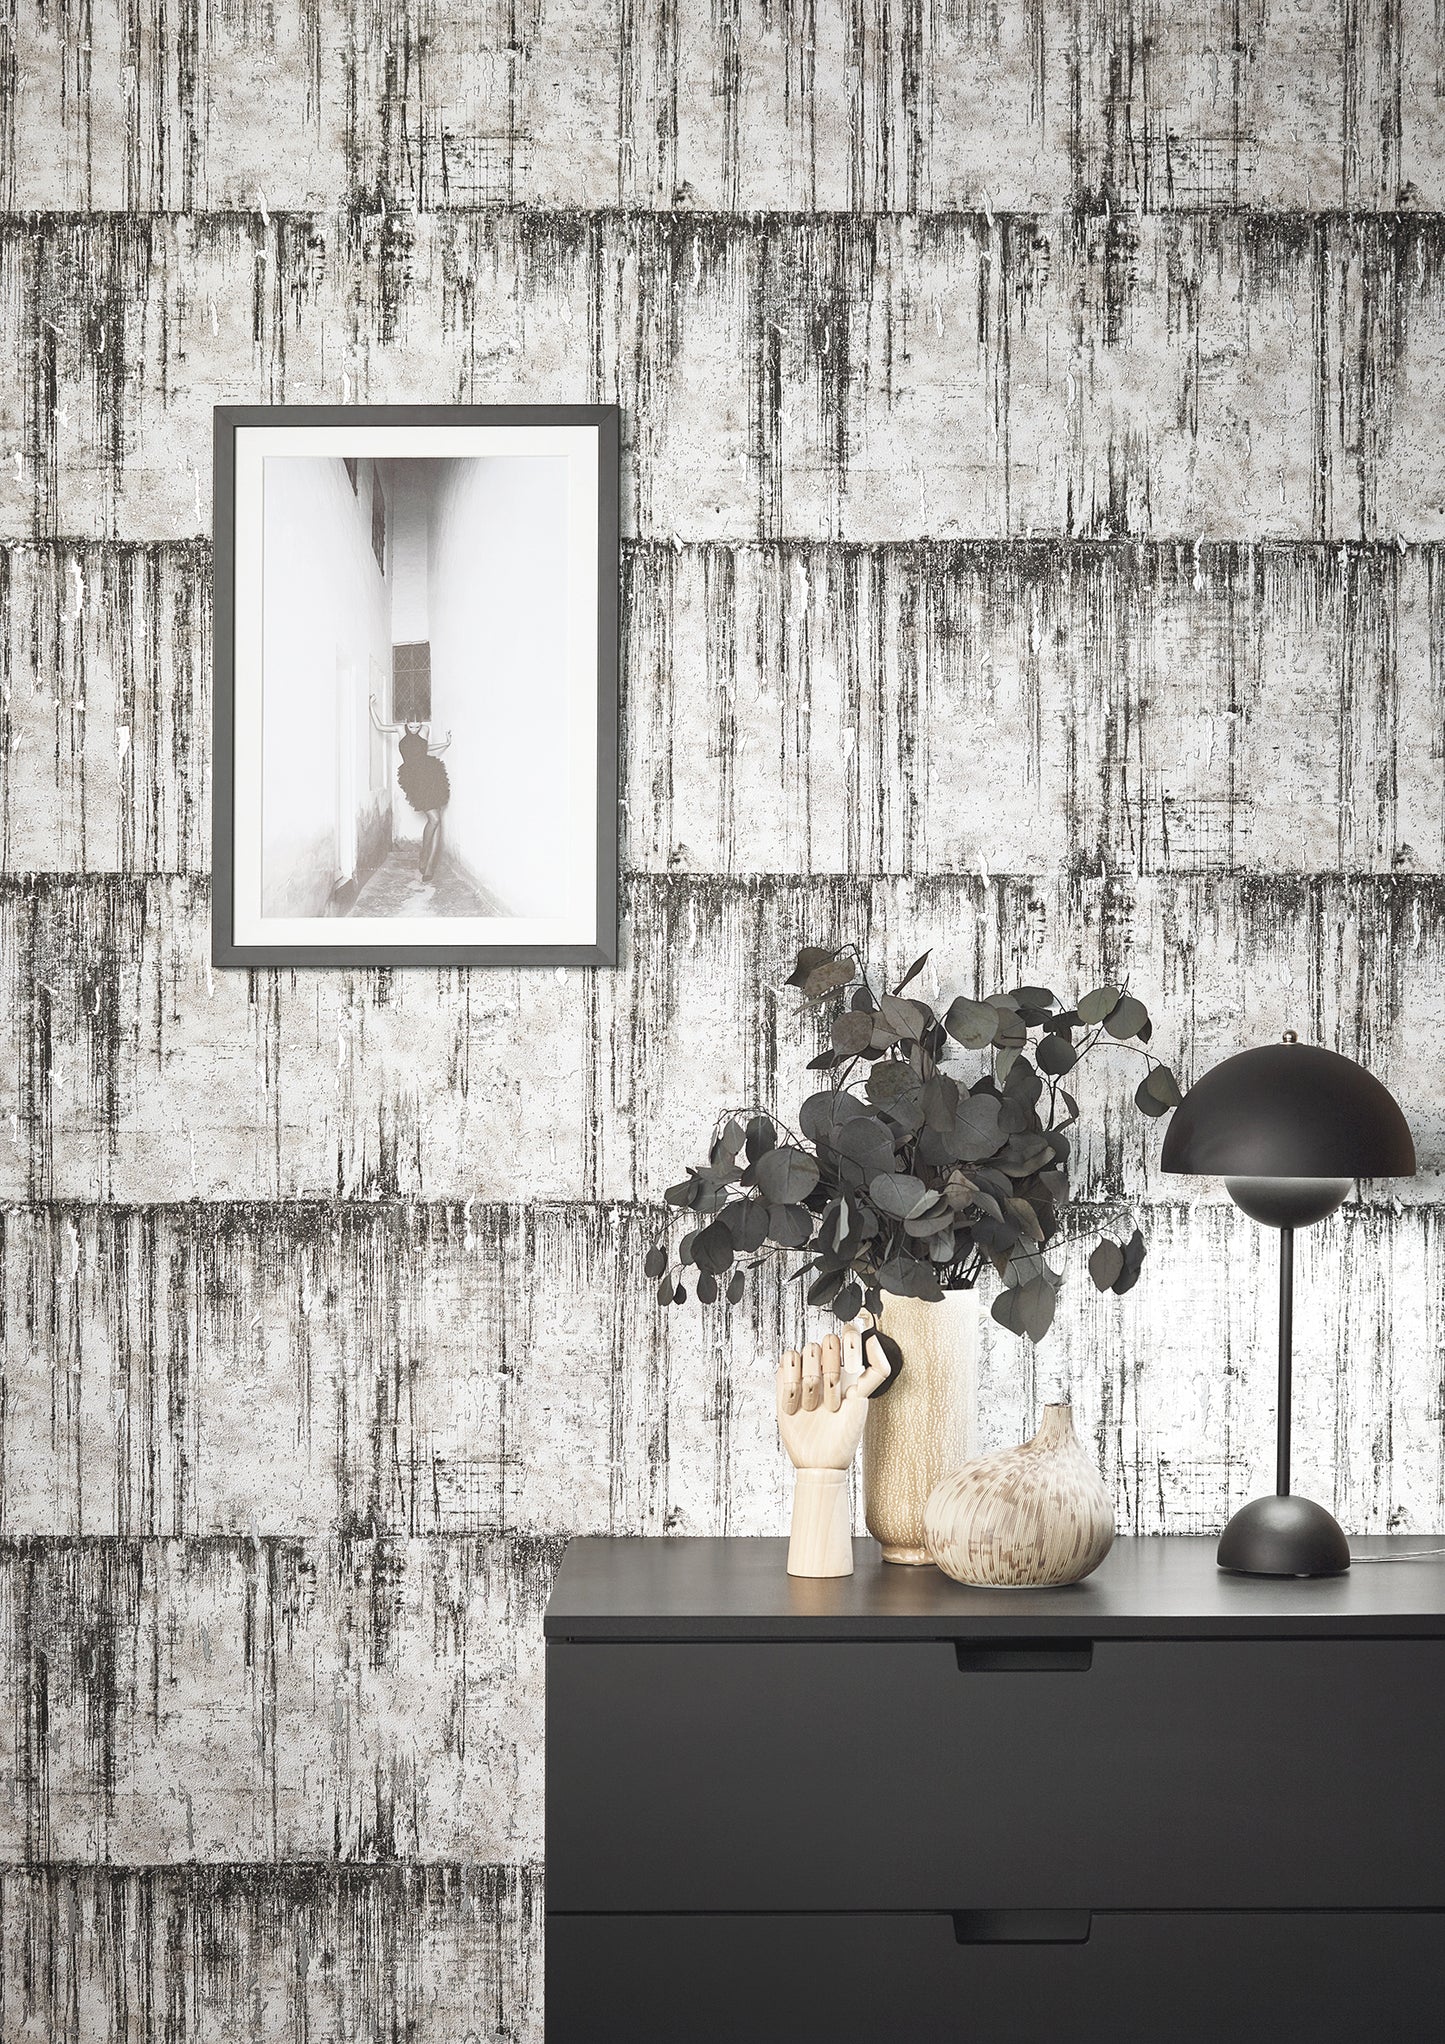 Galerie MB Aged Concrete Wallcovering